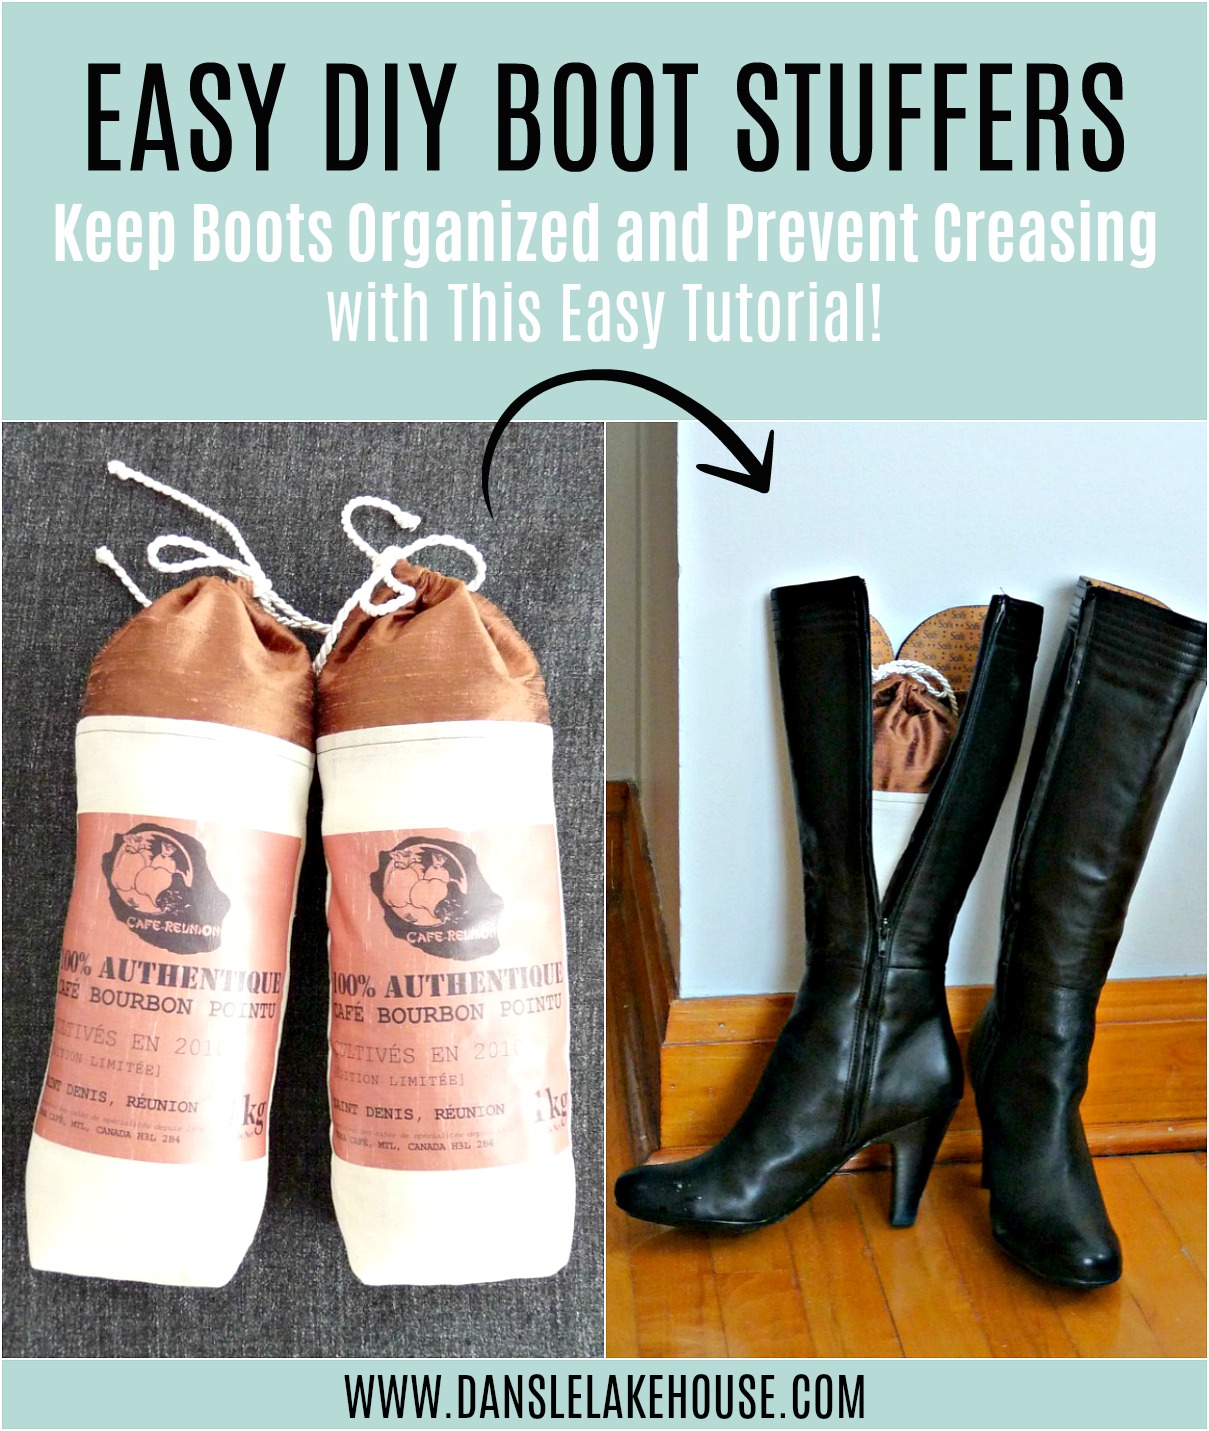 How to Make Easy DIY Boot Stuffers. Sew Your Own Boot Shapers Using Scrap Fabric and Add Essential Oils or Dried Lavender. #diy #organizing #bootshapers #bootstuffers #sewingprojects